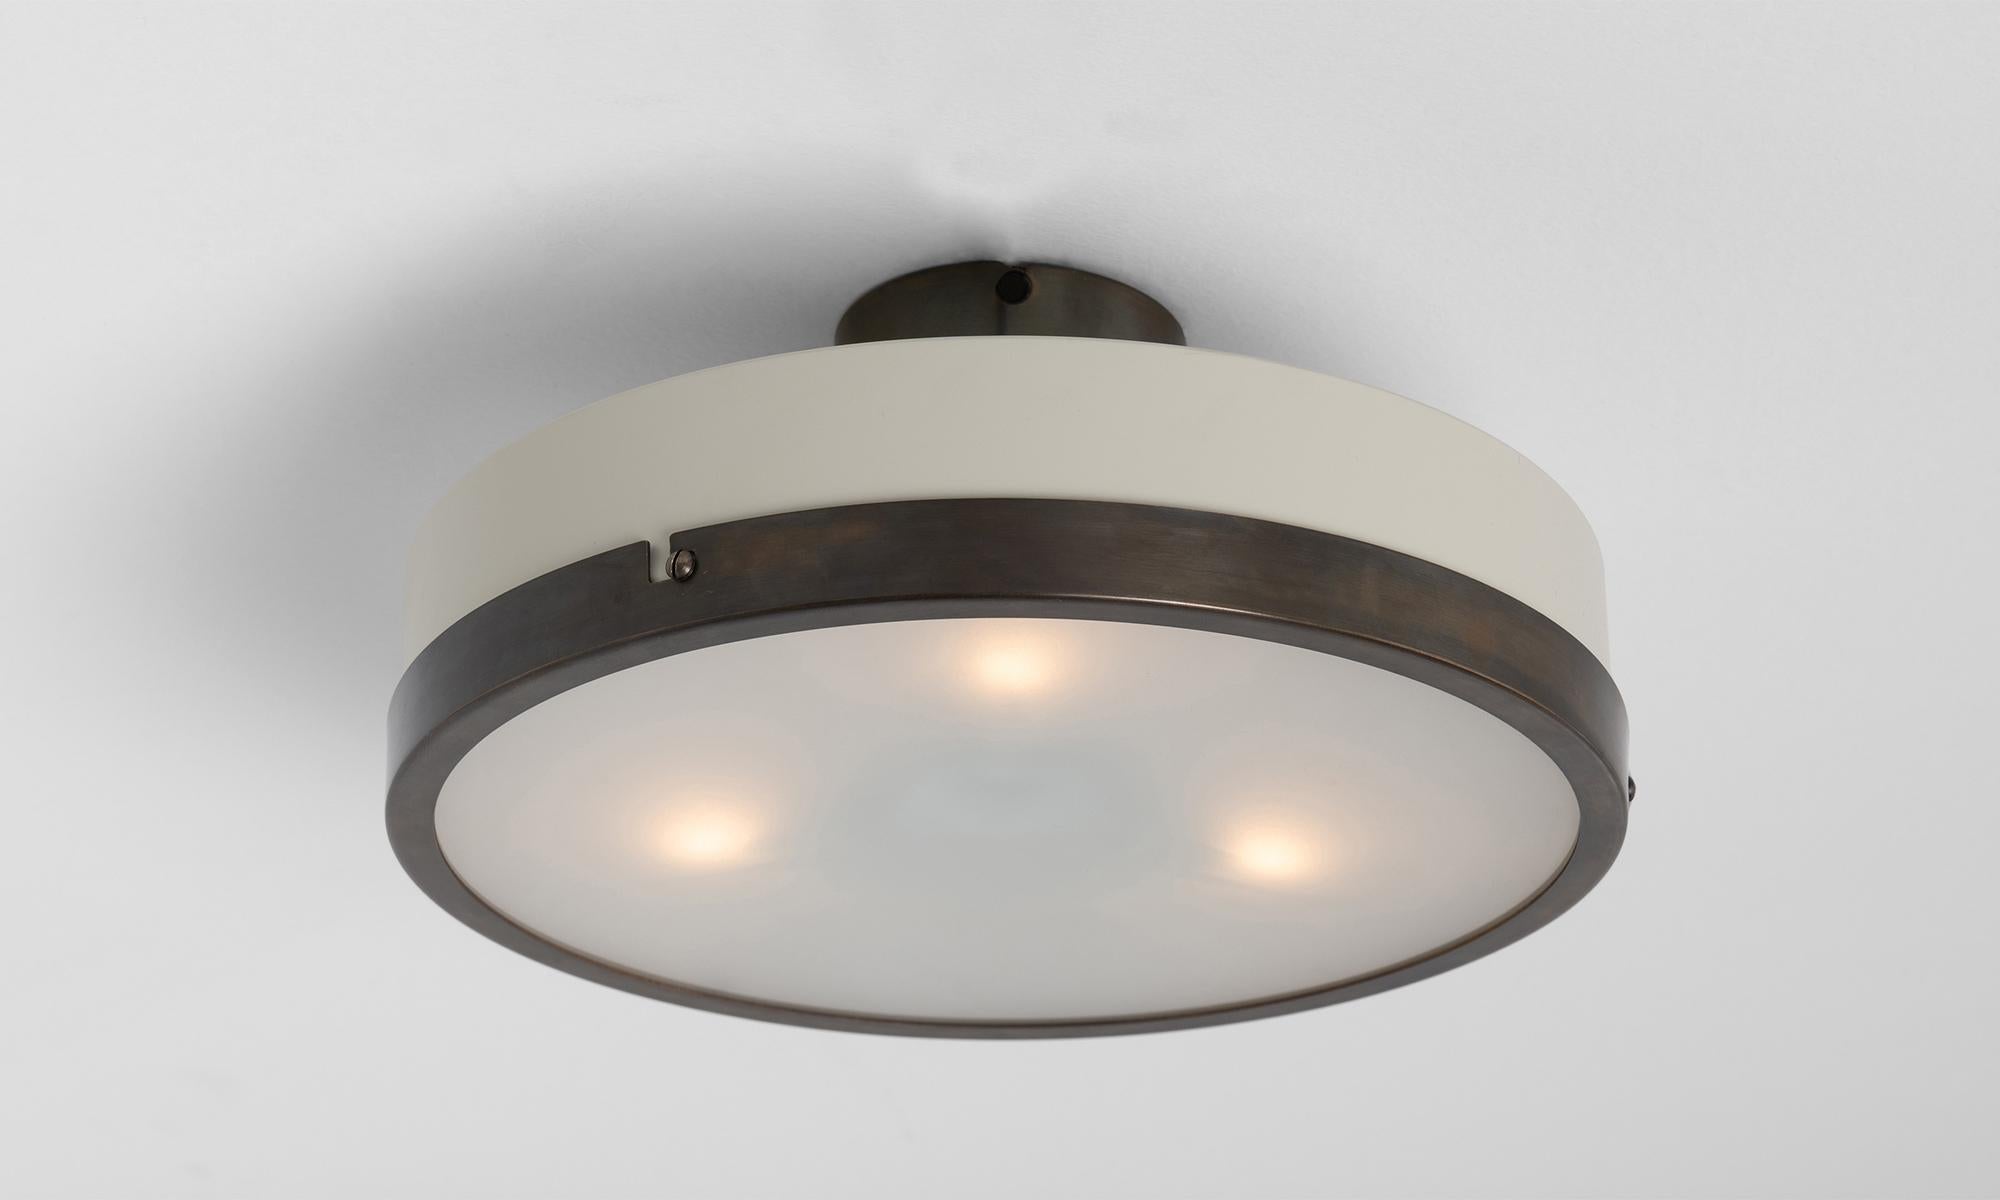 Cream Metal and Satin Glass Ceiling Mount
Made in Italy
Cream metal surround with brass hardware and satin glass diffuser.
10”dia x 4.5”h
Ref. L4365

*4-6 Week Lead Time*
*EU Wiring / Not UL Listed*
*Mounting Hardware Included, Ceiling Plate = 3